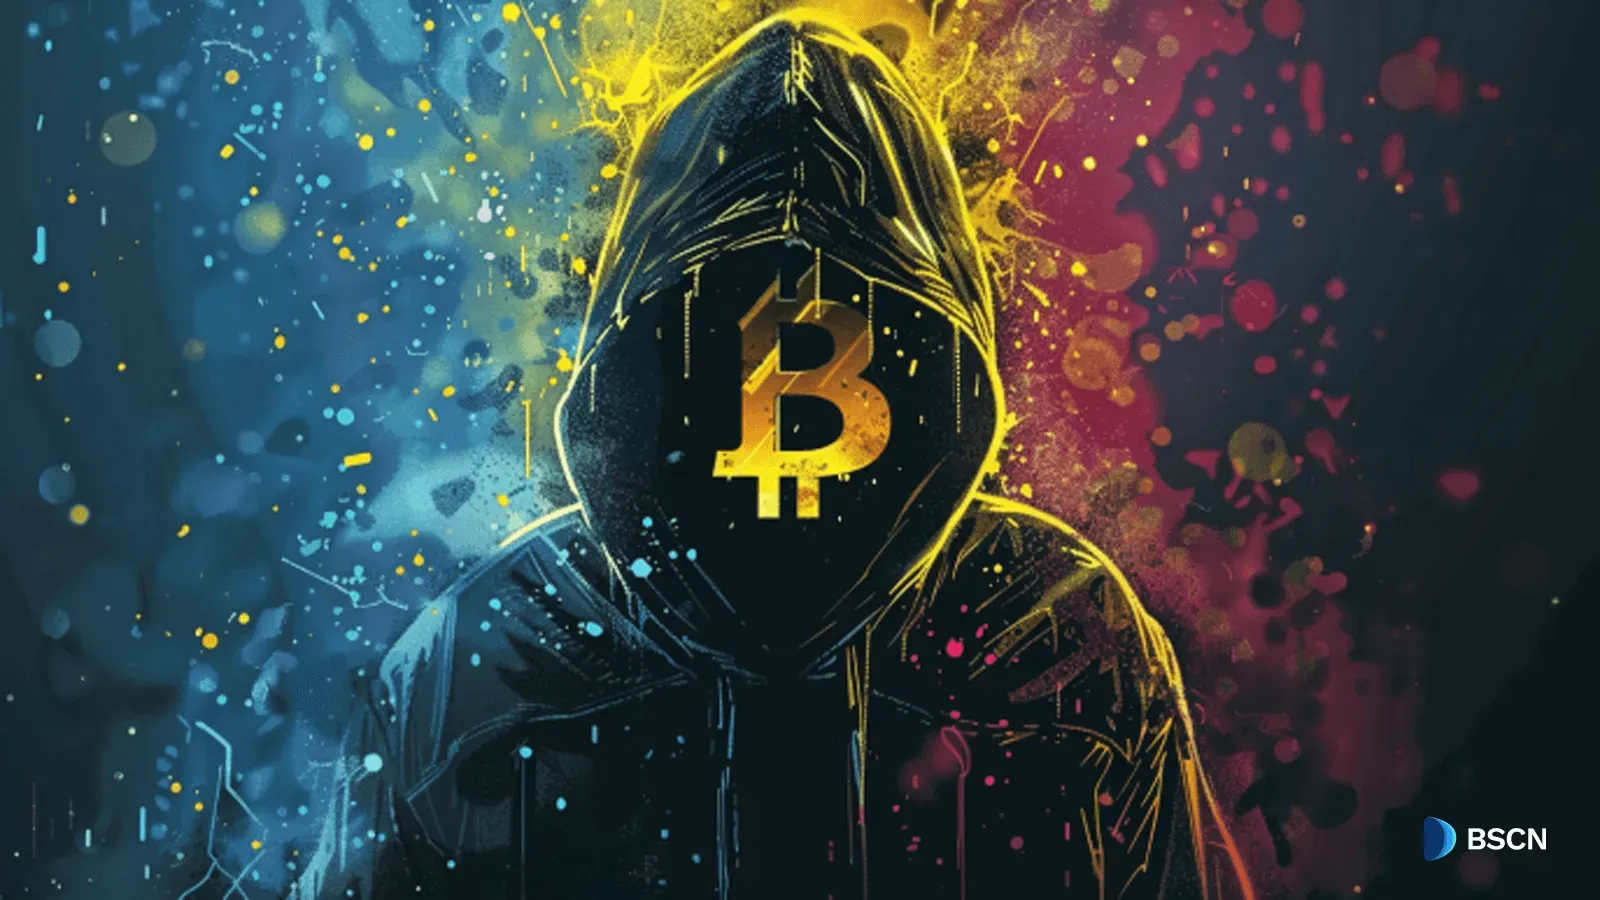 Is Bitcoin Still the Most Commonly Exploited Cryptocurrency by Criminals?